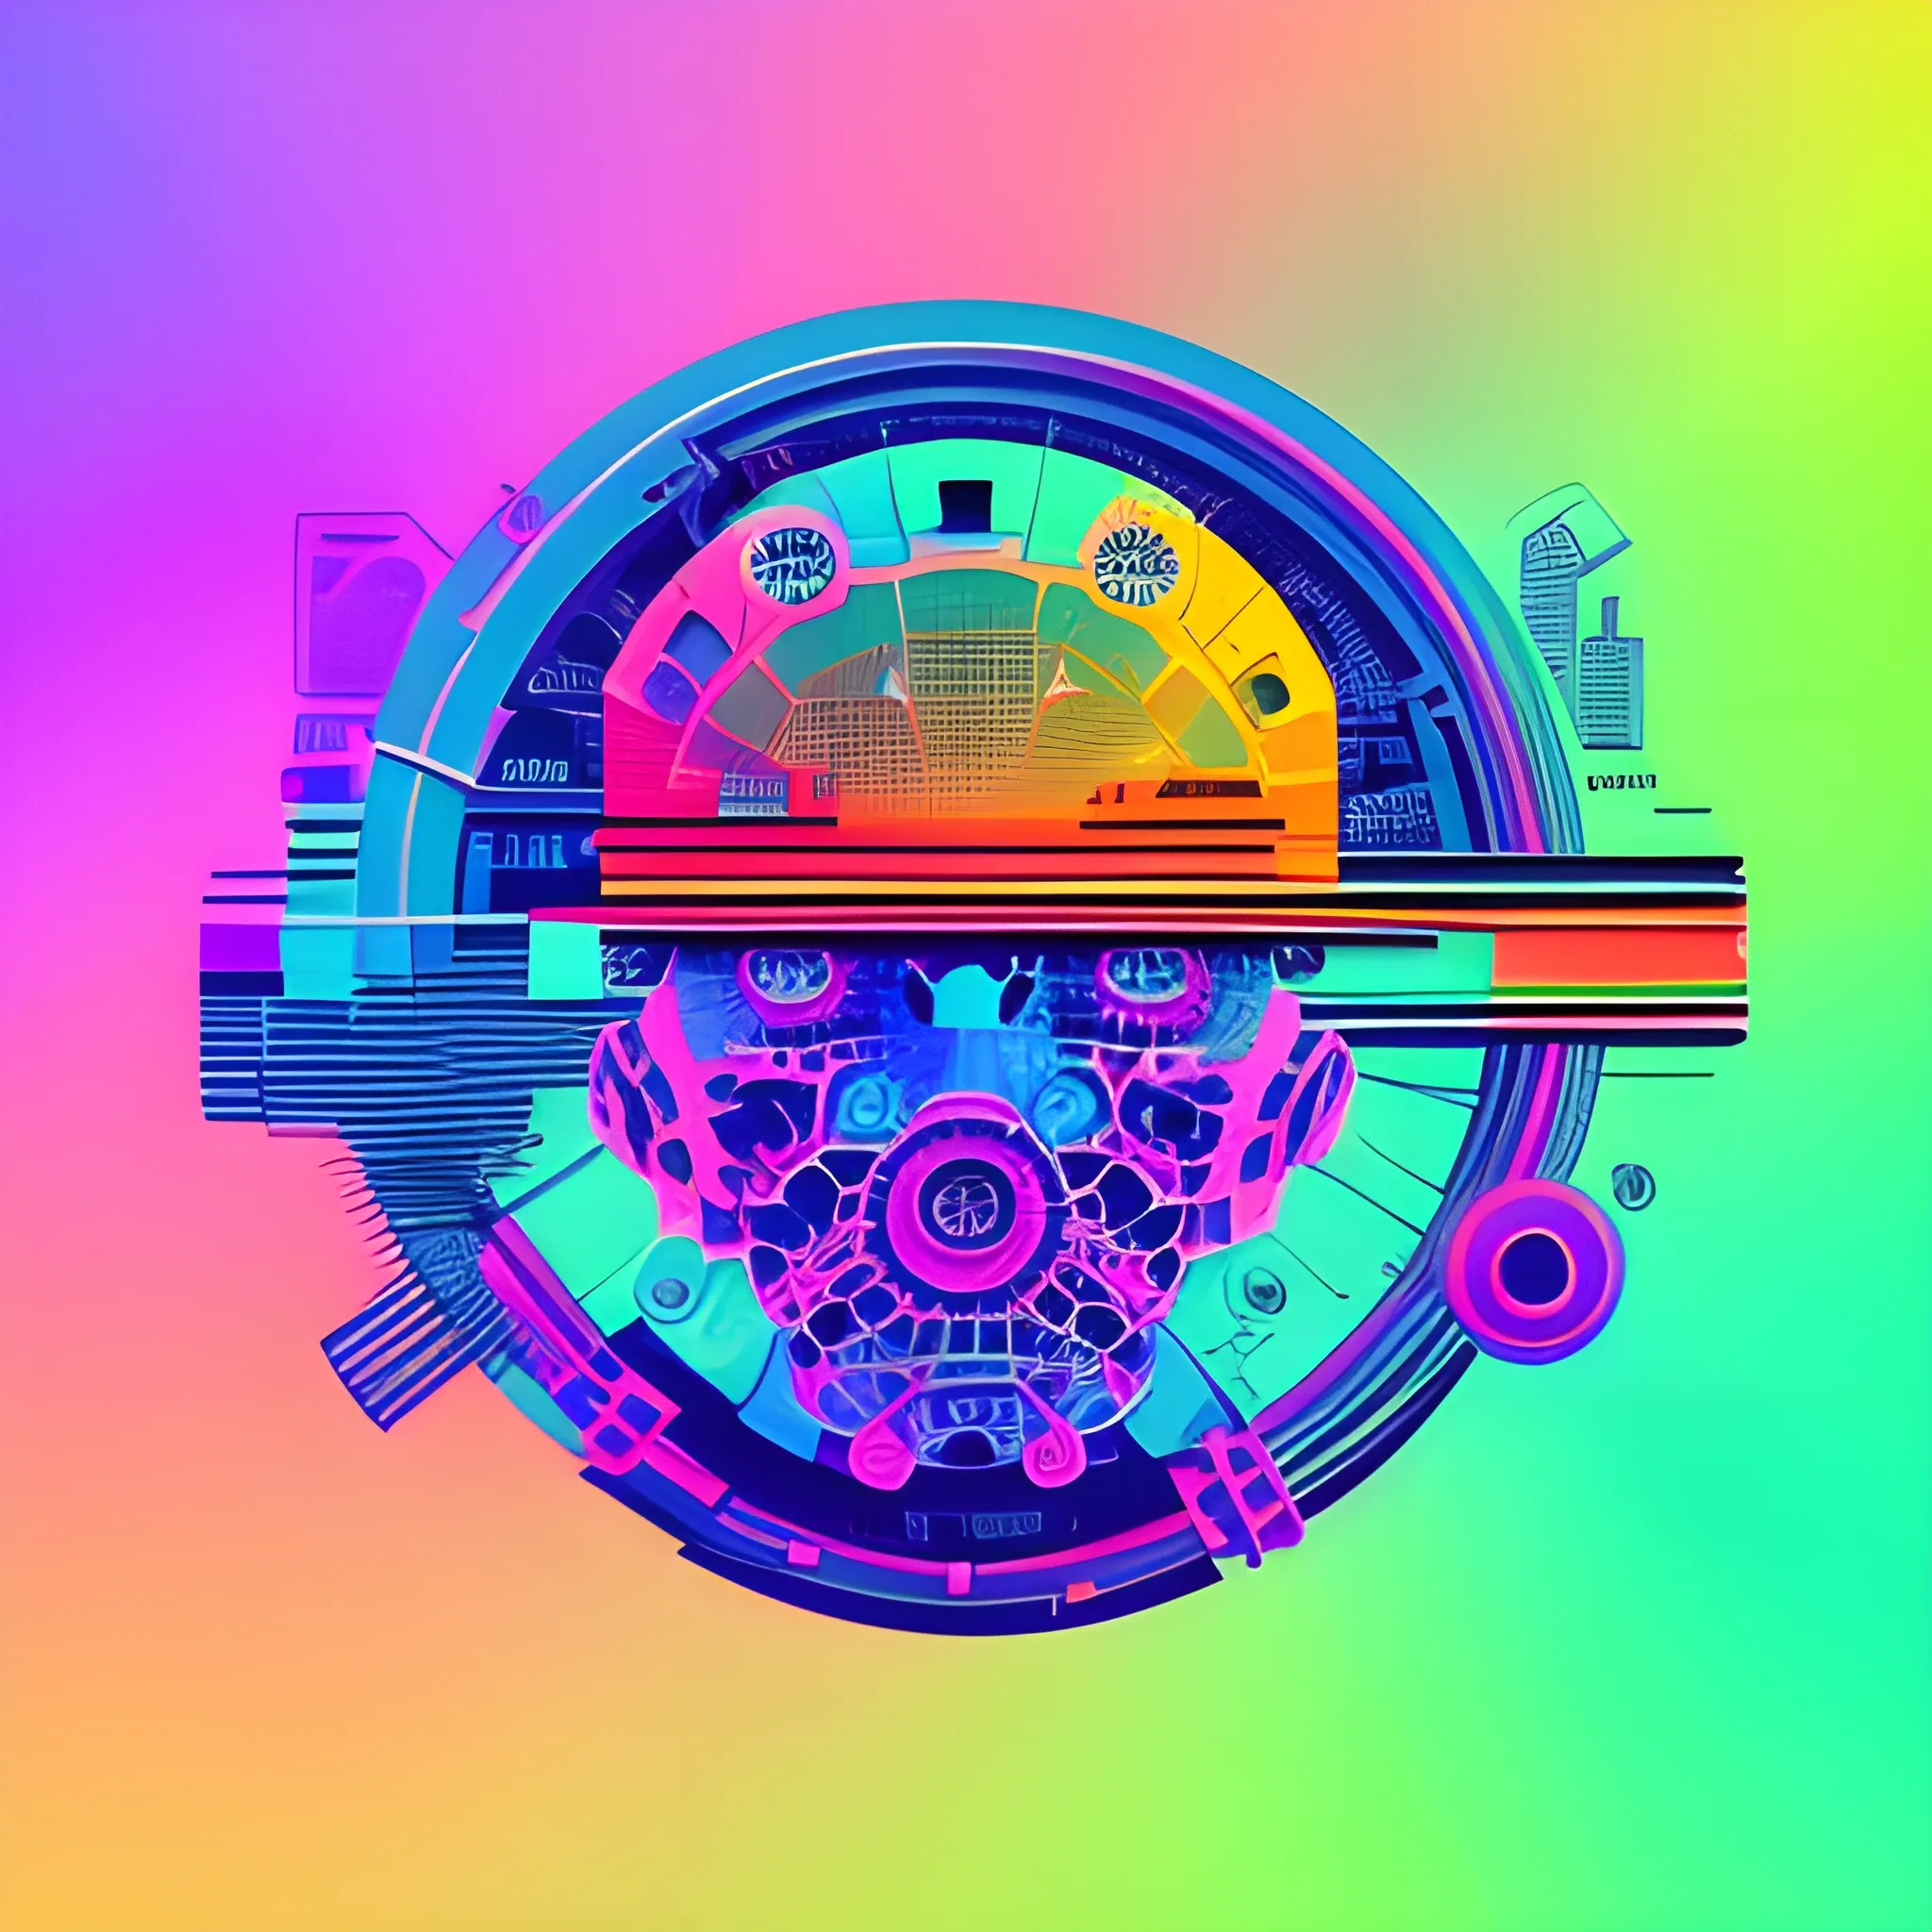 generate a corporative, future, colorful, modern image with this concept: Digital products Design, Trippy, related to digital products. Do not use machines. Use really environment. I want an image without text